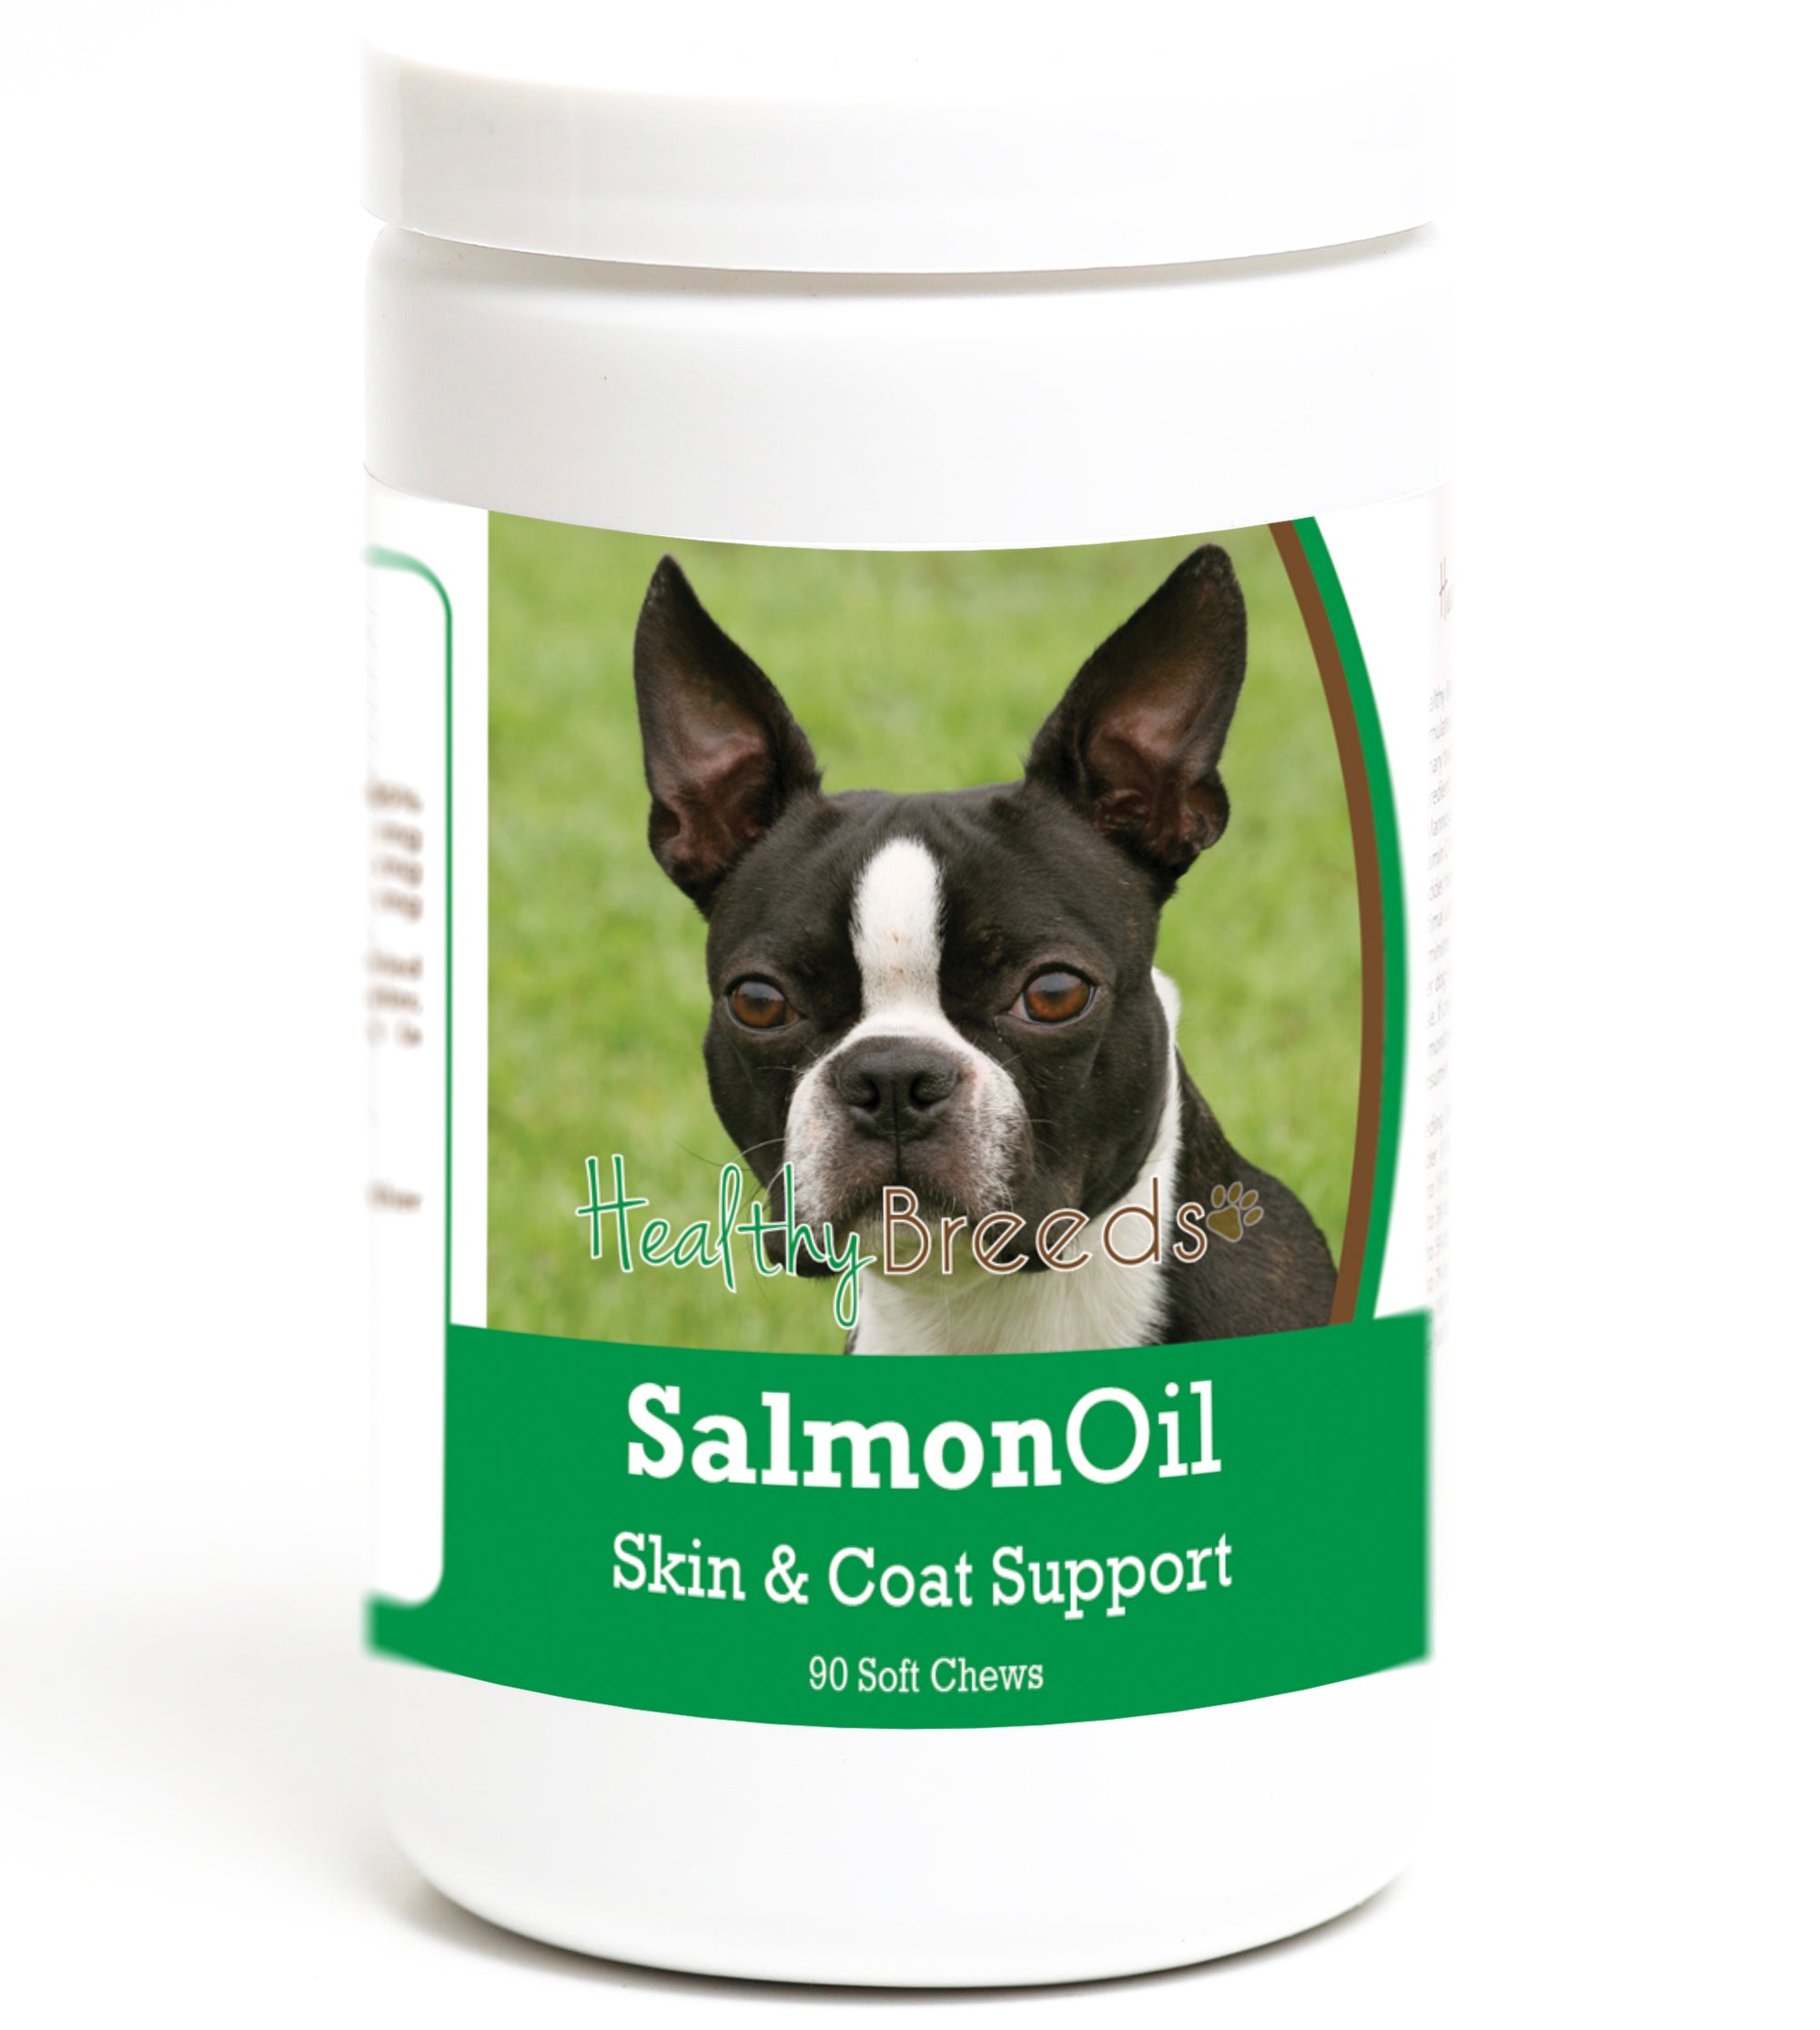 Healthy Breeds Boston Terrier Salmon Oil Soft Chews 90 Count